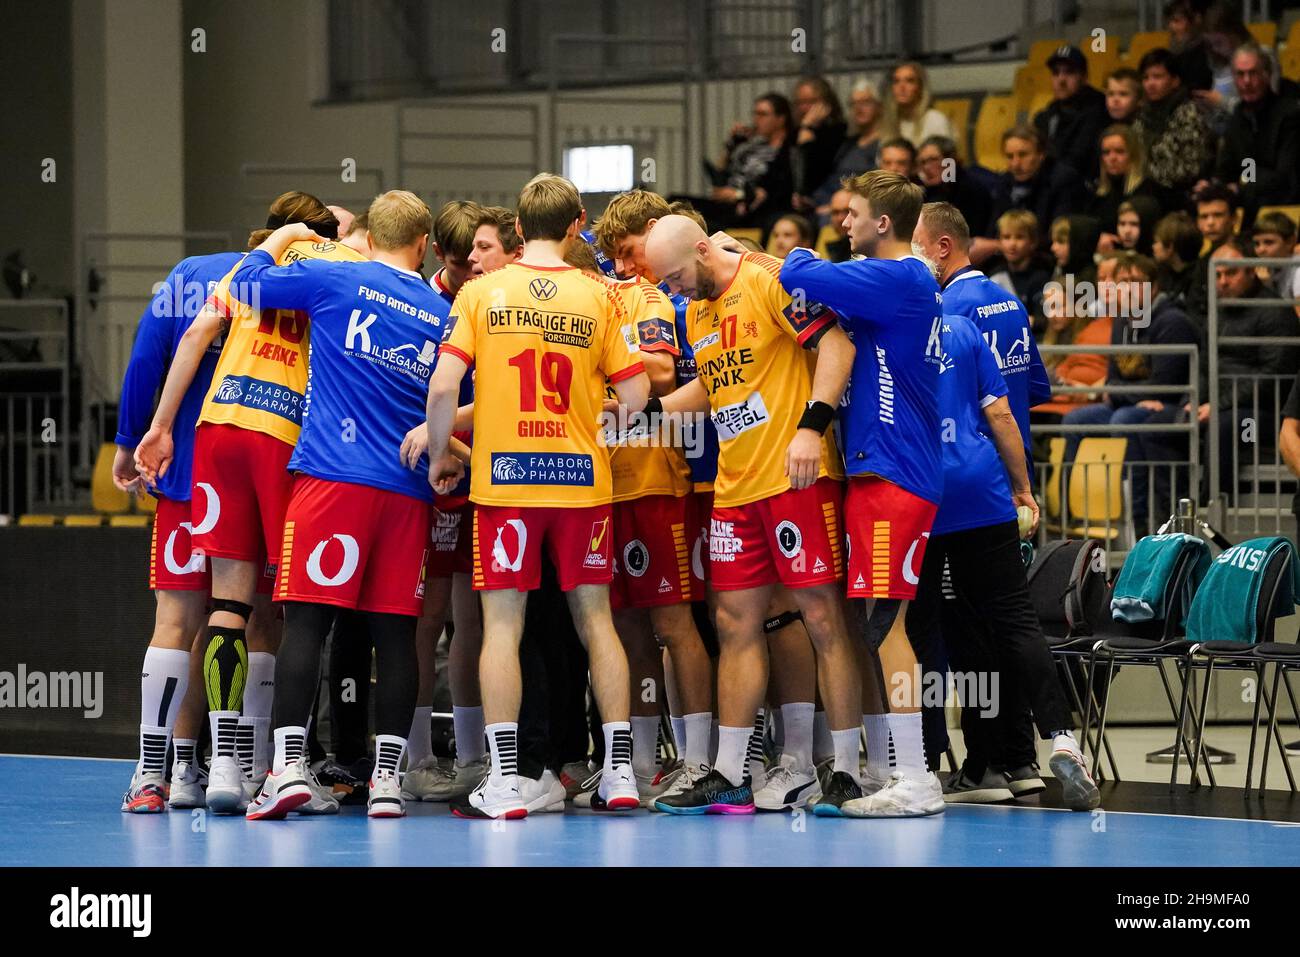 Page 8 - Ehf European League Resolution Photography and Images - Alamy